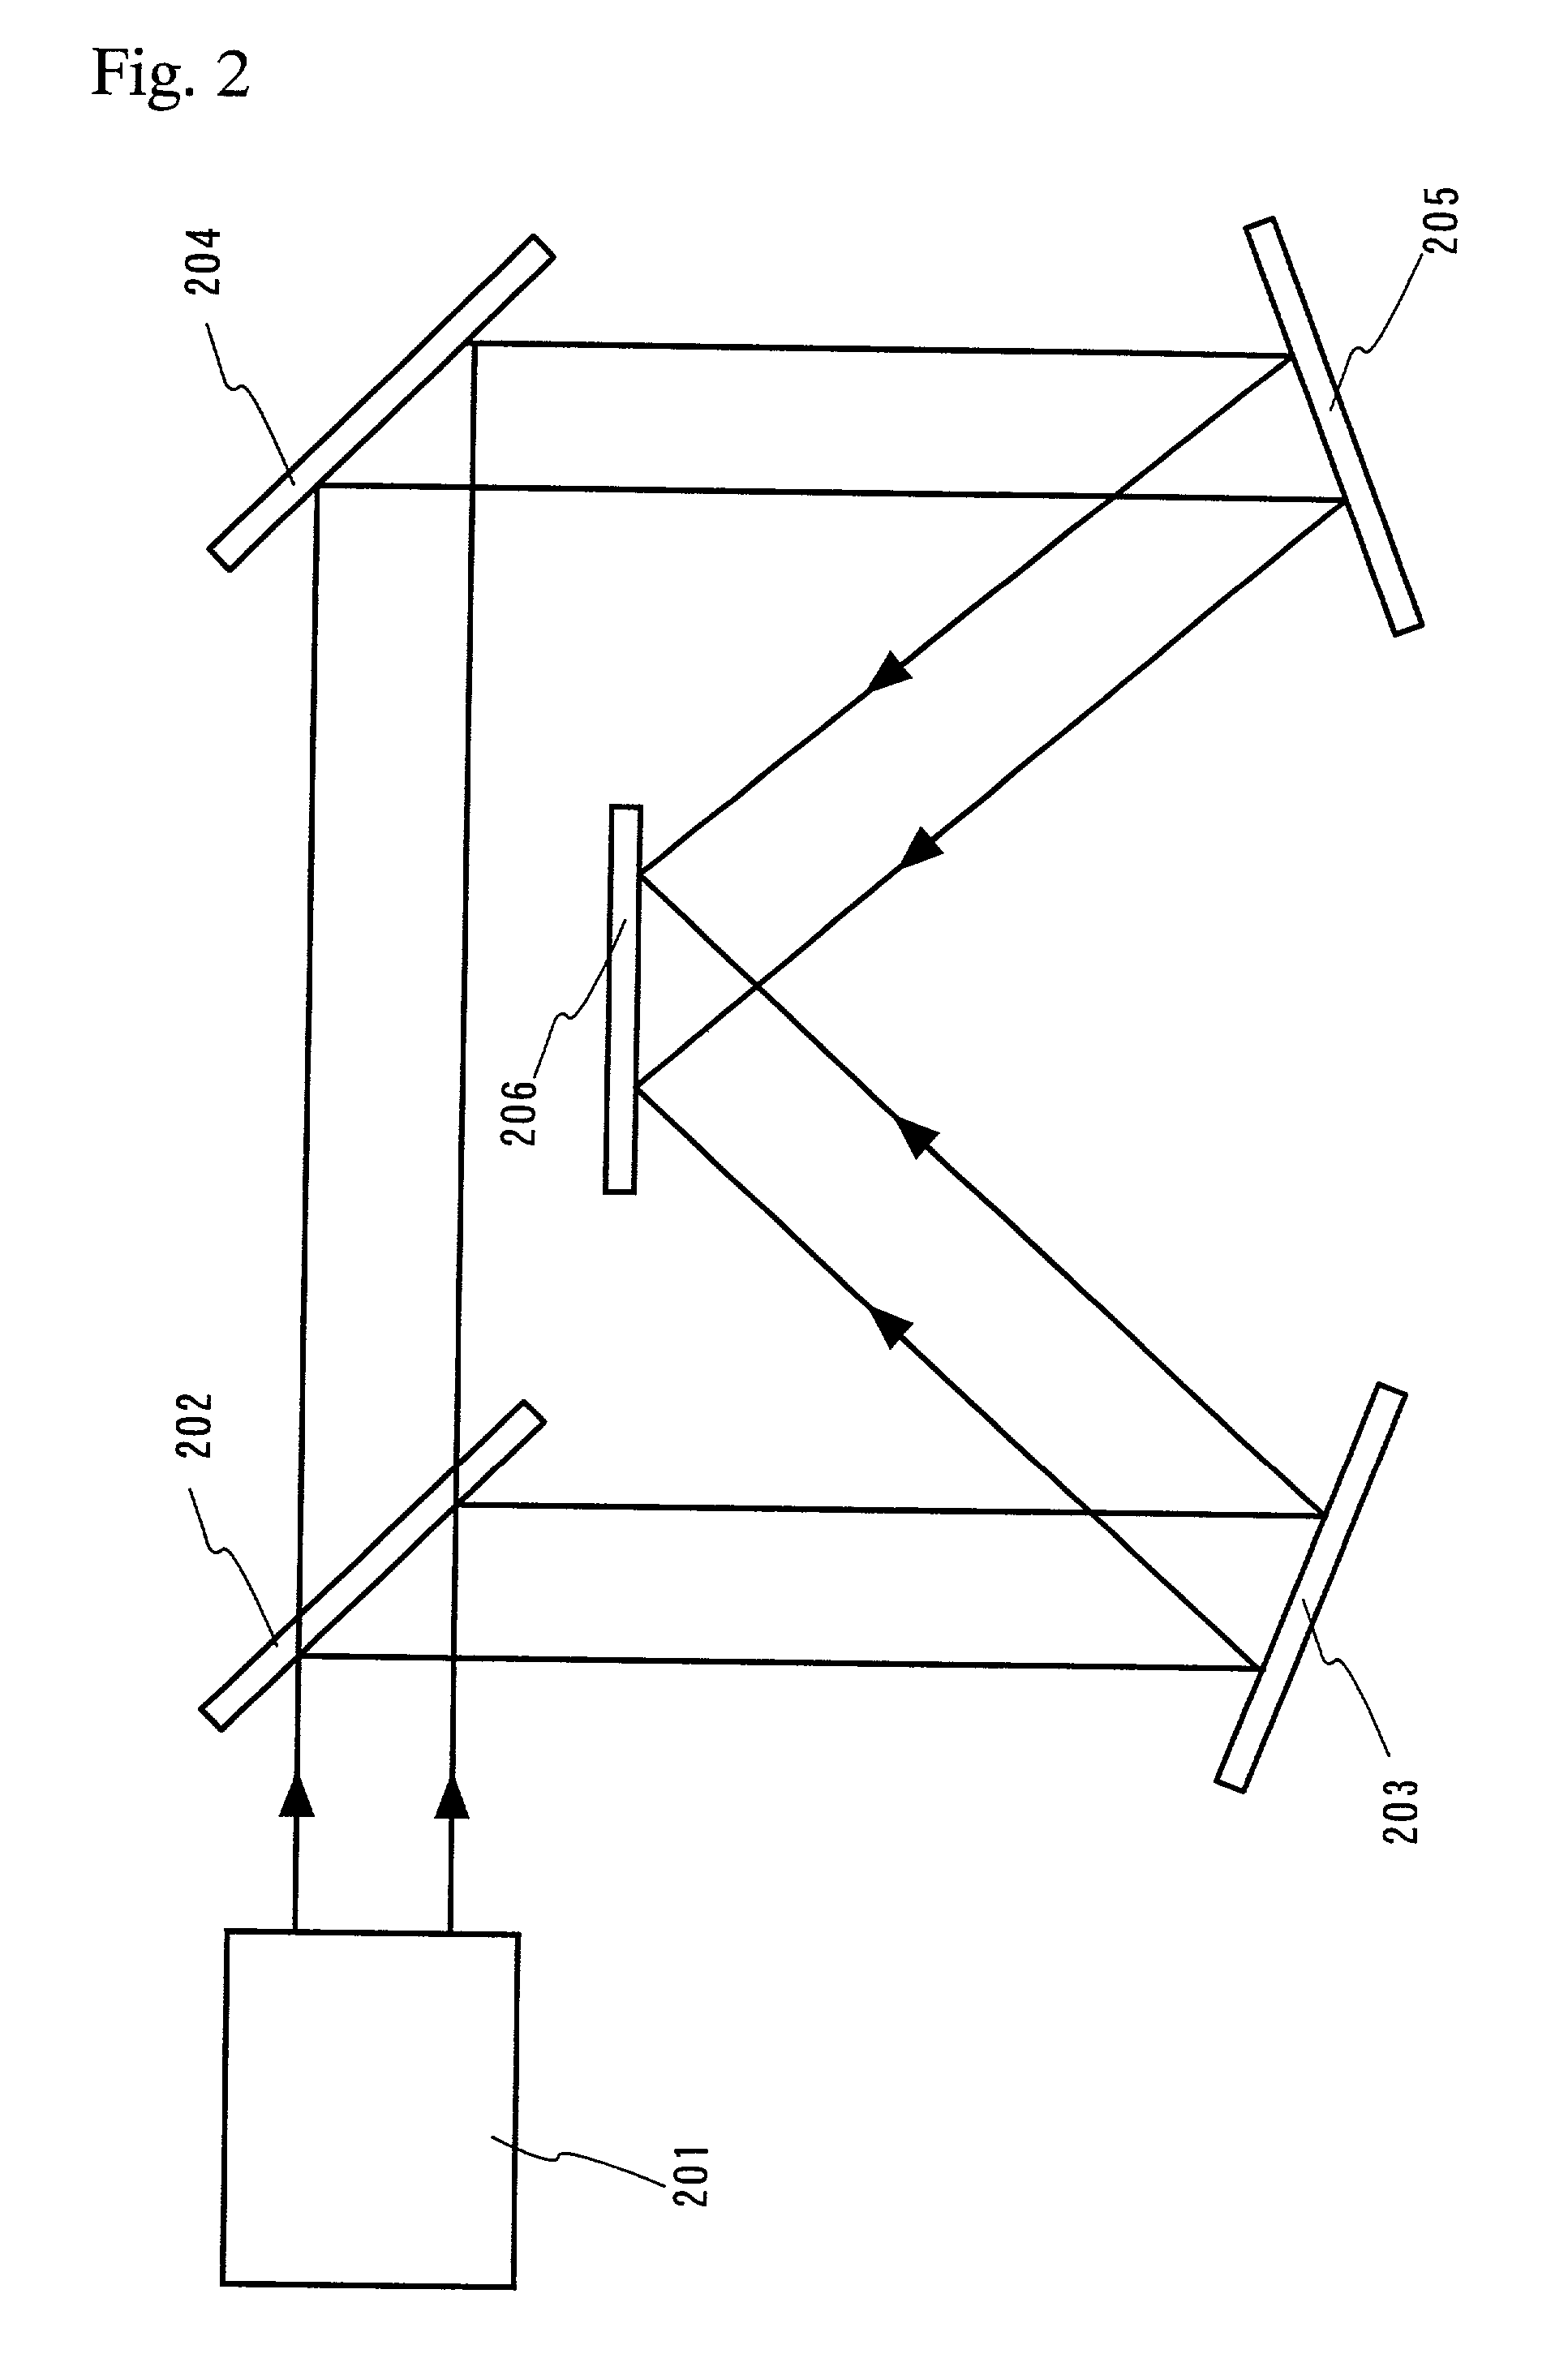 Laser irradiation apparatus and method of fabricating a semiconductor device